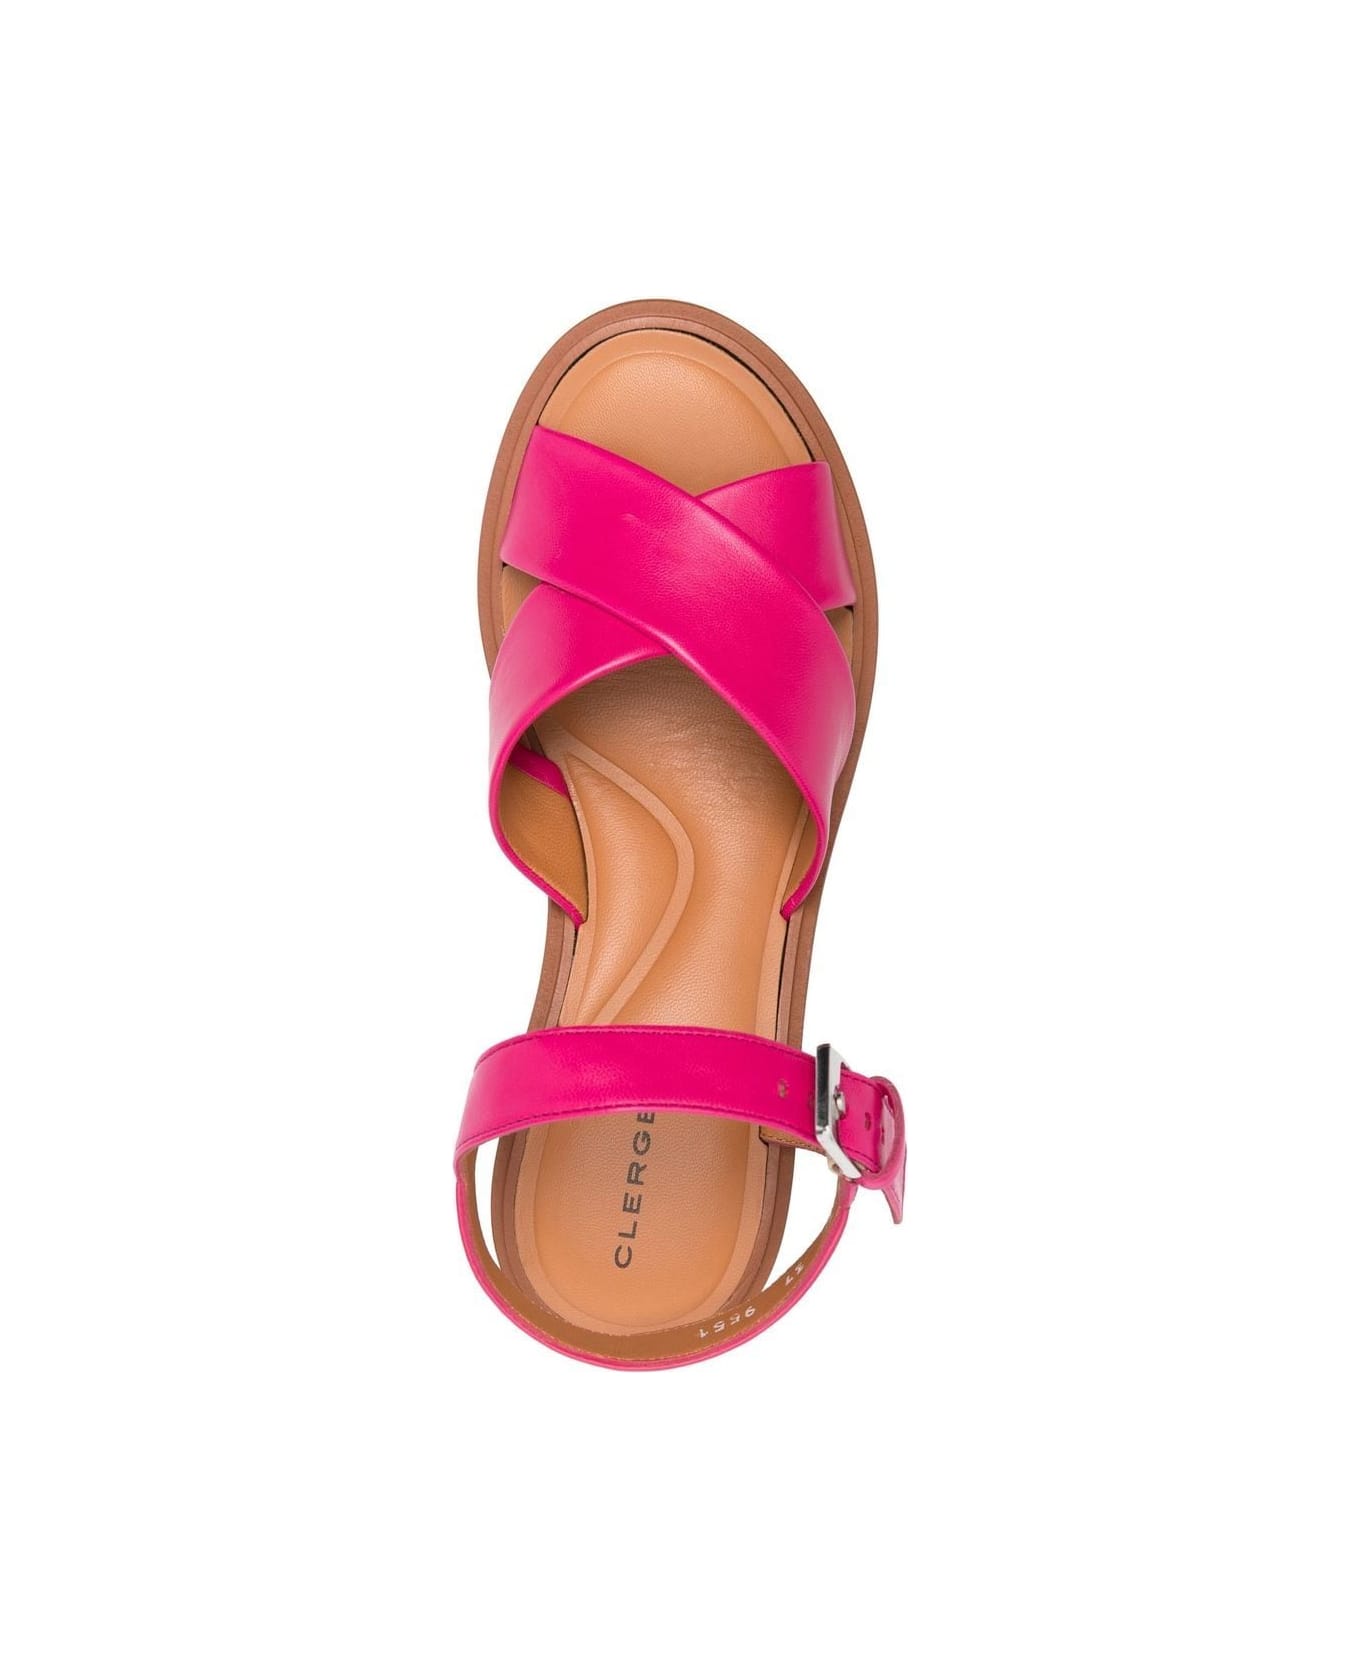 Clergerie Charline9 Criss Cross Sandal With Closure At The Ankles - Hibis Nap